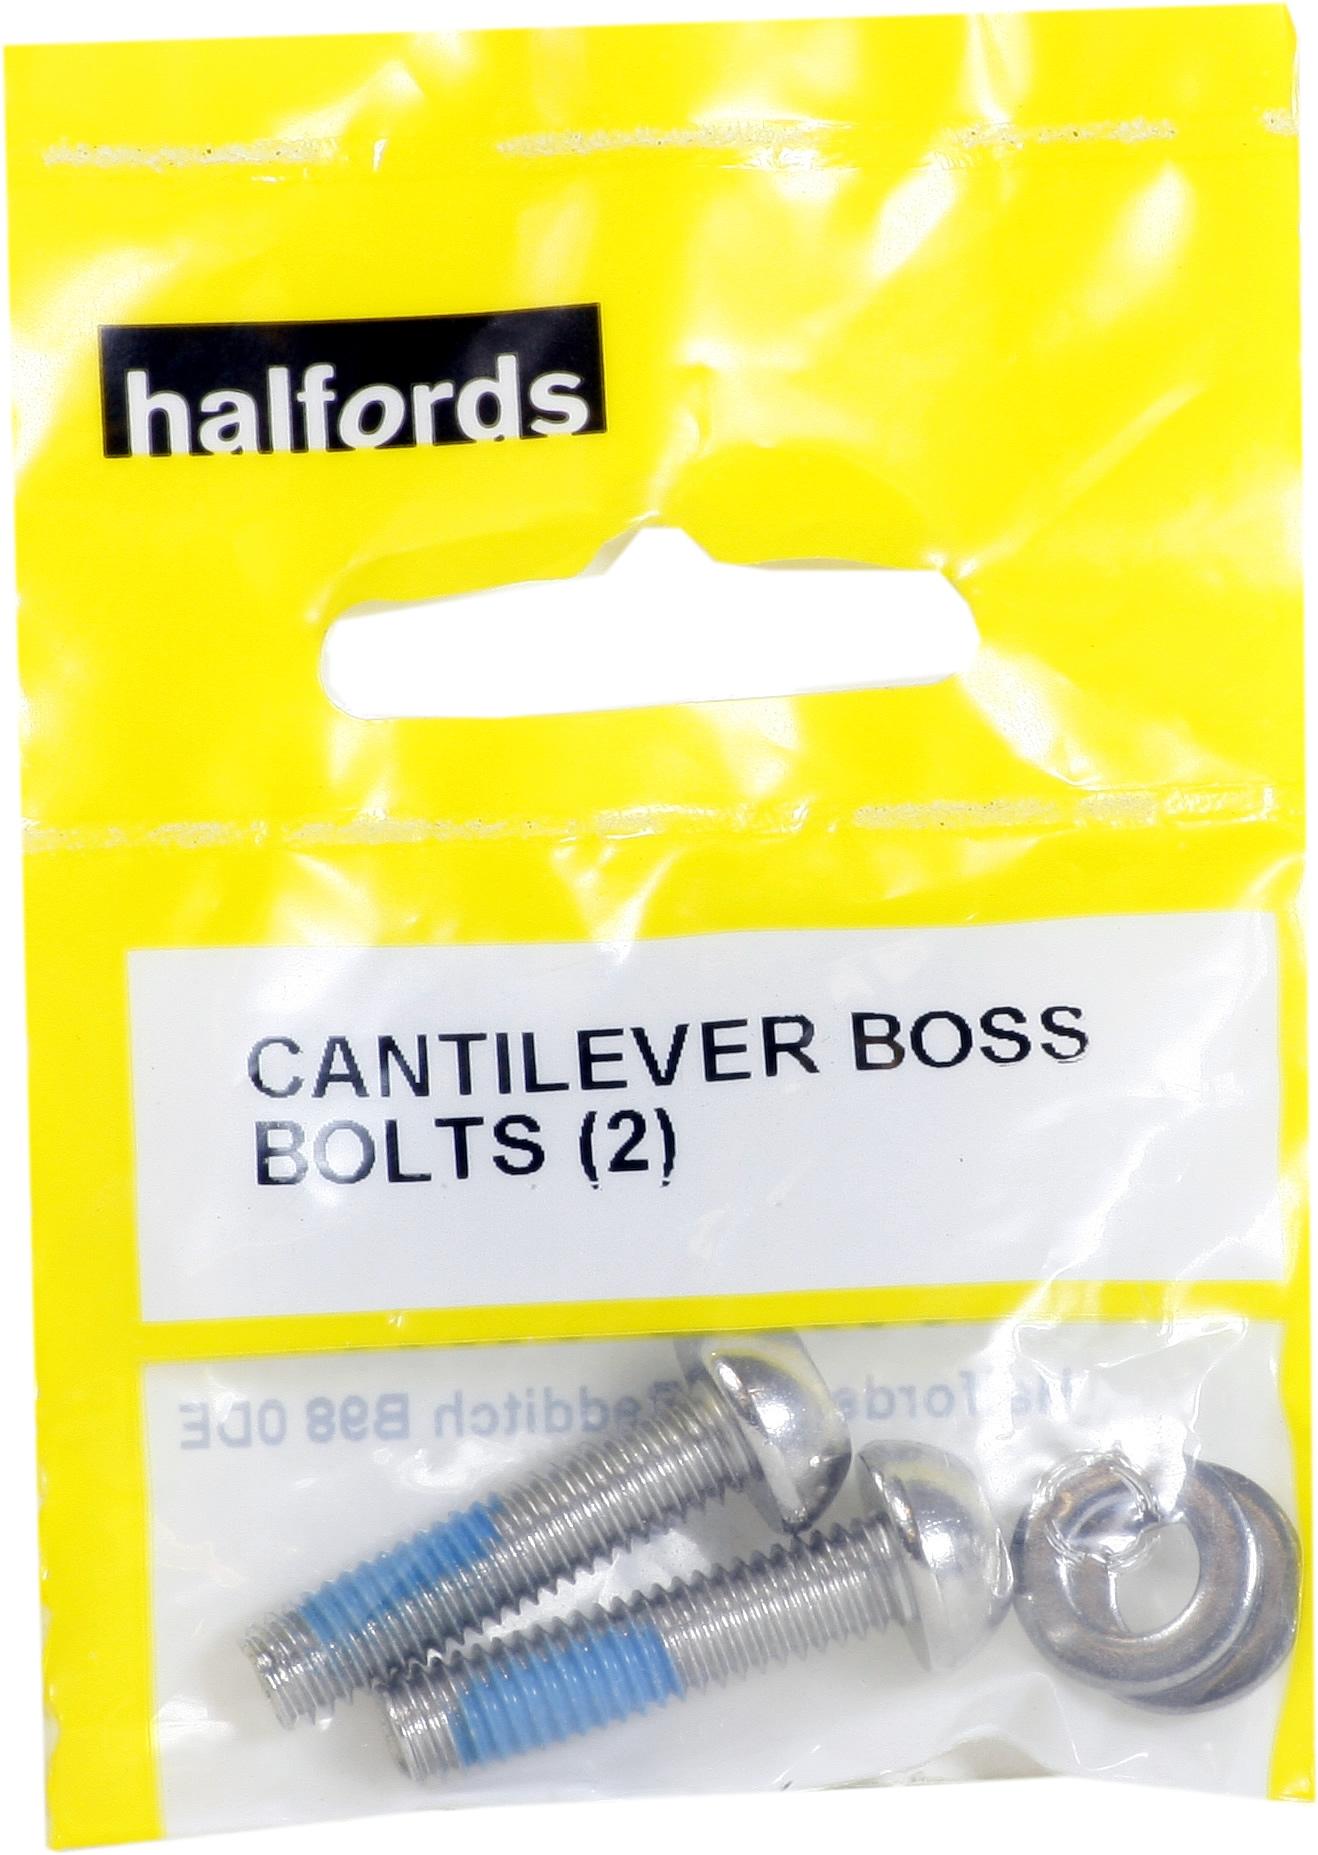 Halfords Cantilever Boss Bolts